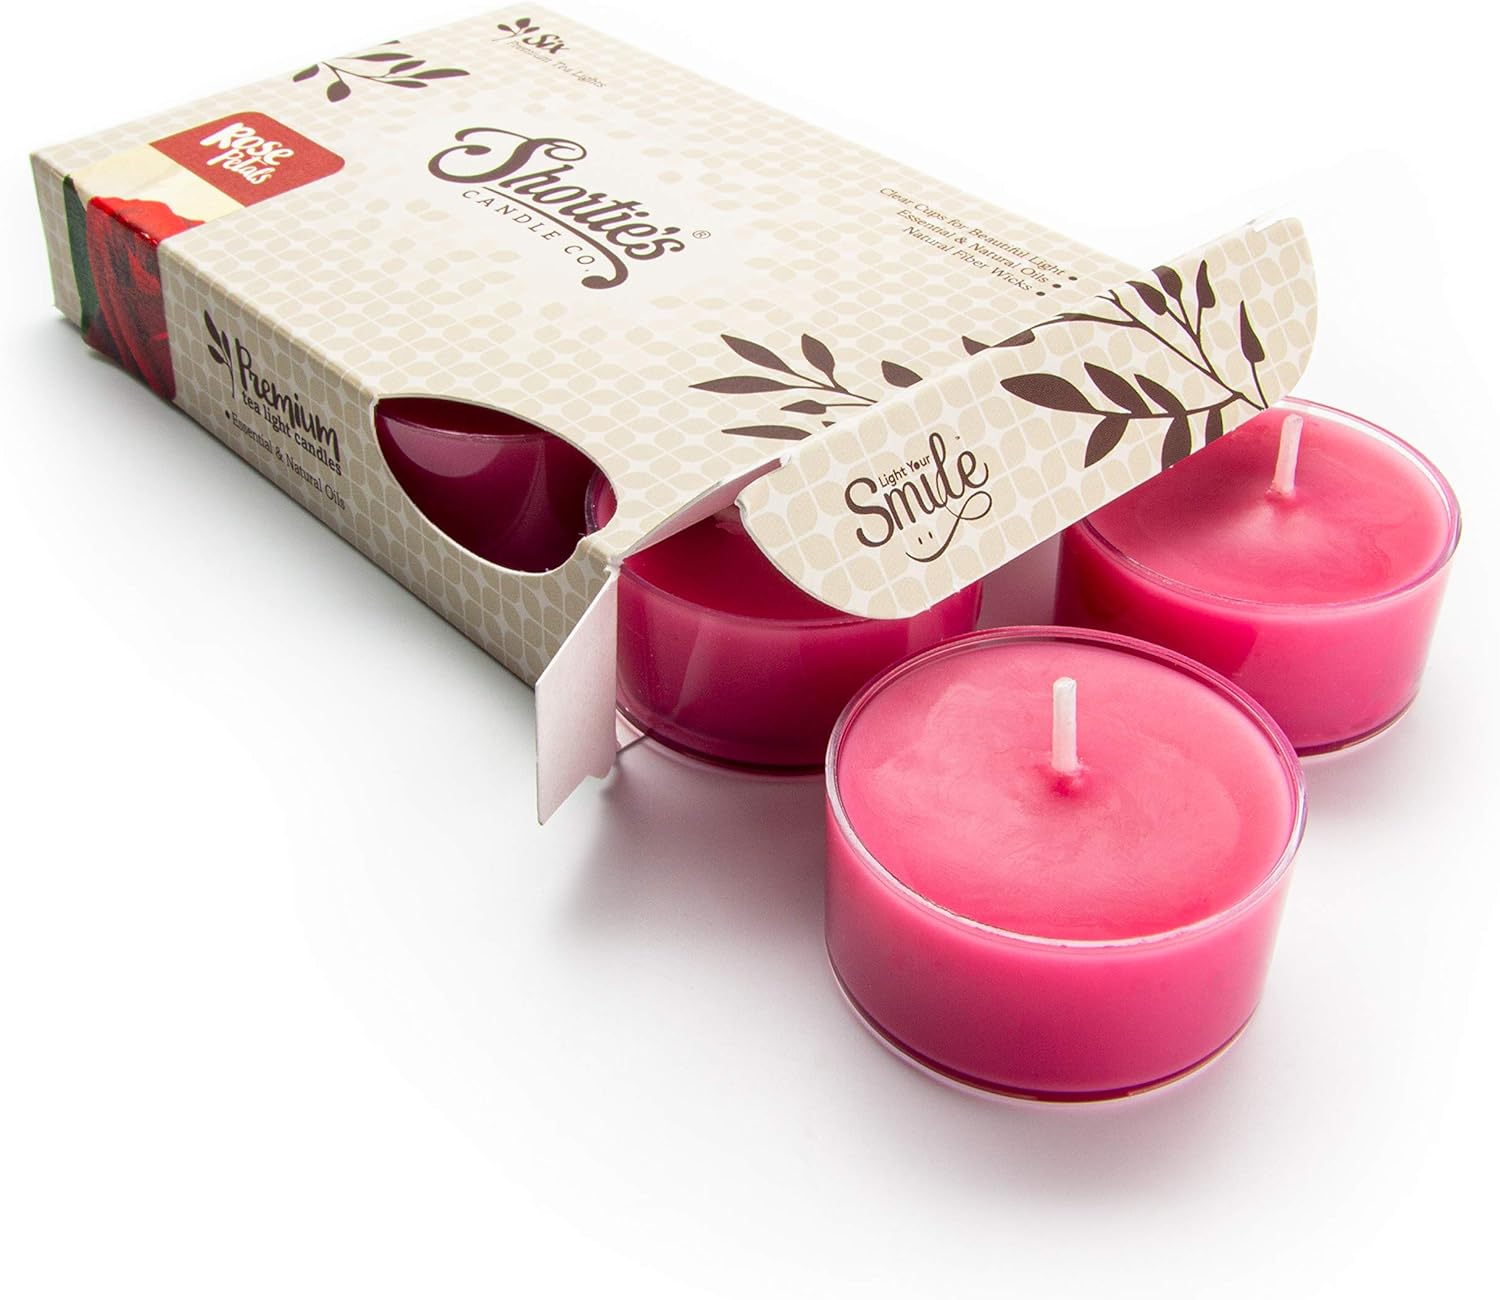 Rose Petals Premium Tealight Candles - Highly Scented with Essential Oils - 6 Pink Tea Lights - Beautiful Candlelight - Made in The USA - Flower & Floral Collection